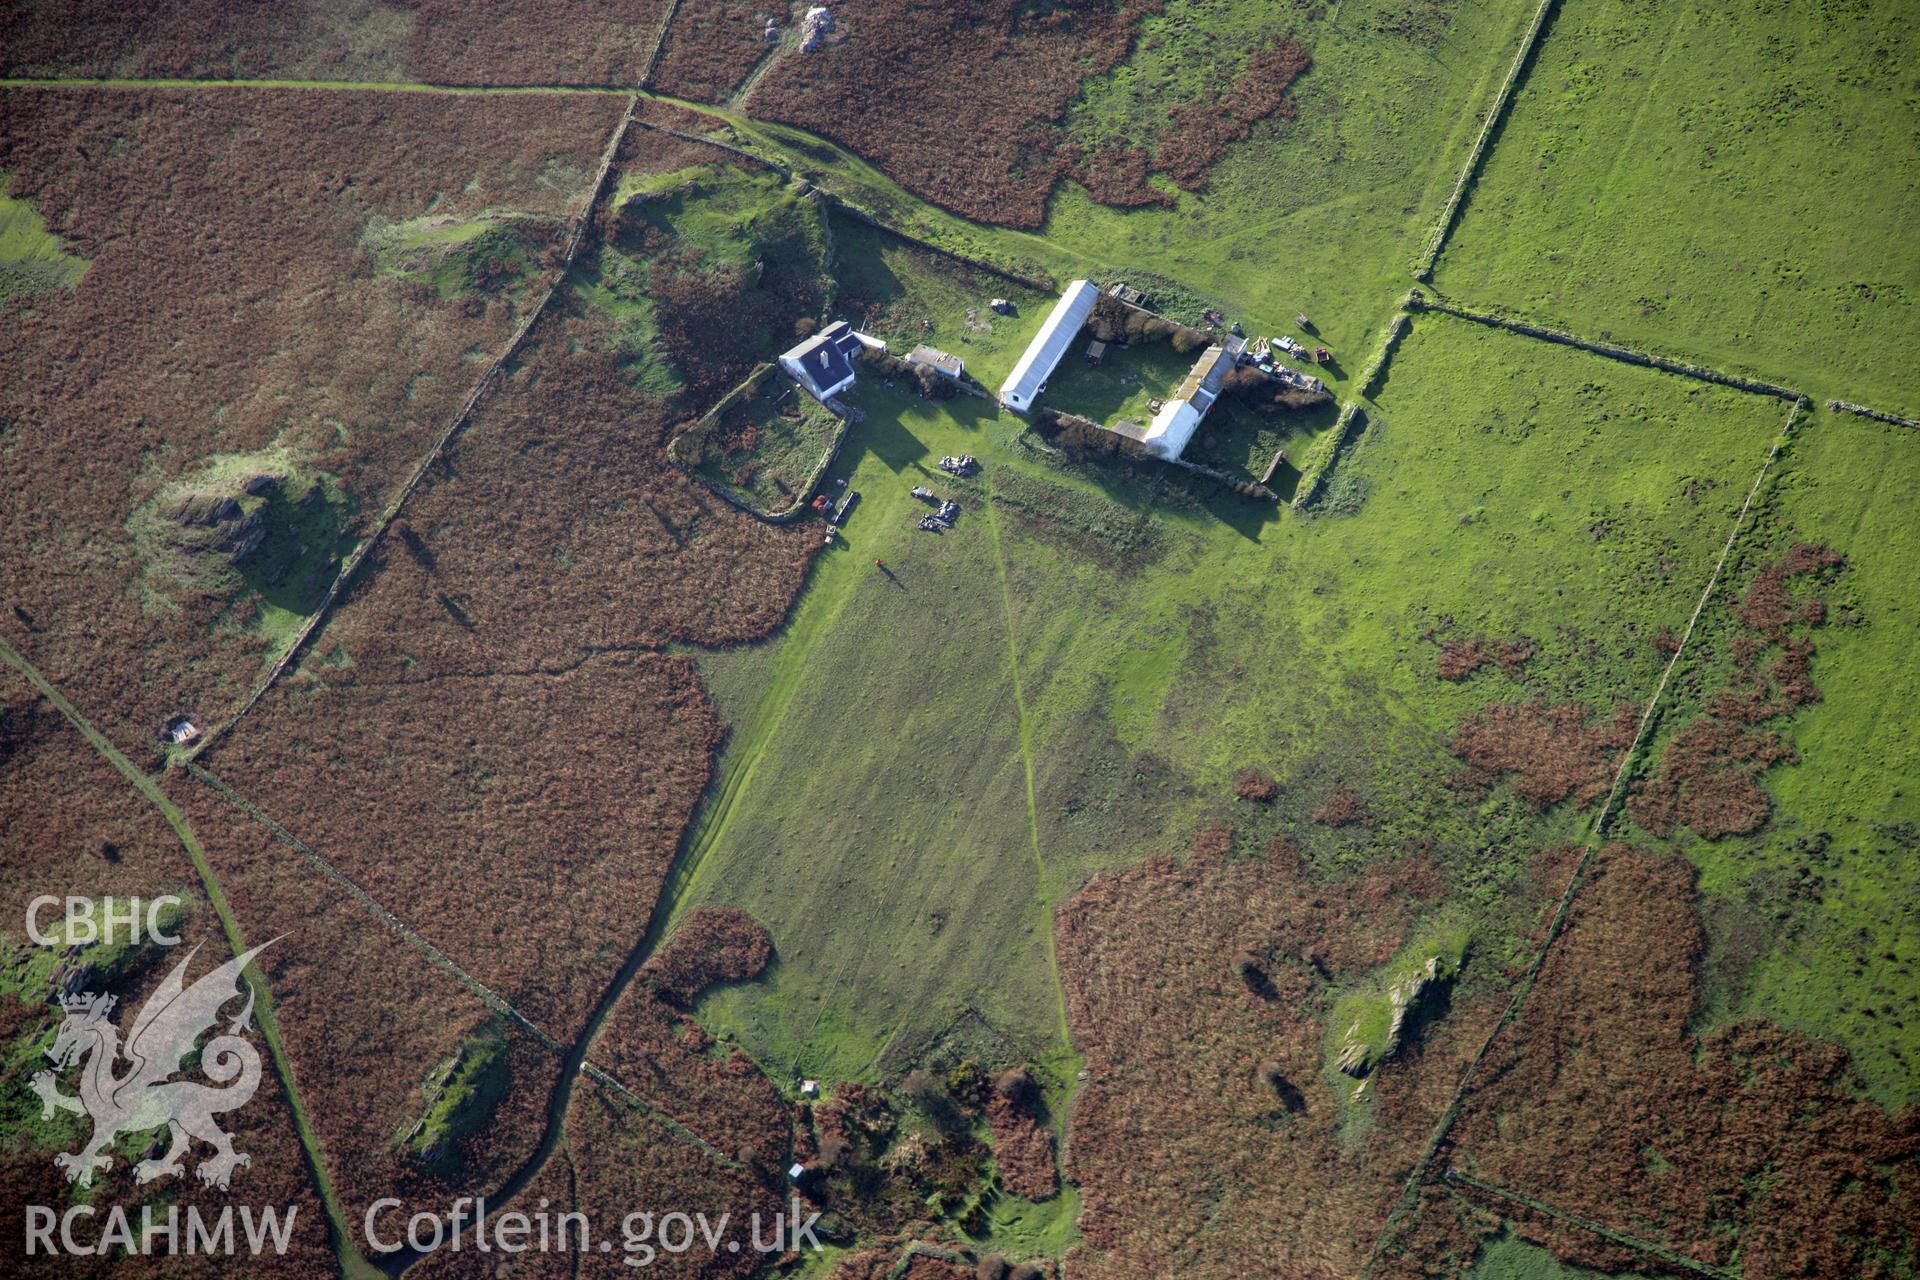 RCAHMW colour oblique photograph of farmhouse, Skokholm Island, viewed from the east. Taken by O. Davies & T. Driver on 22/11/2013.